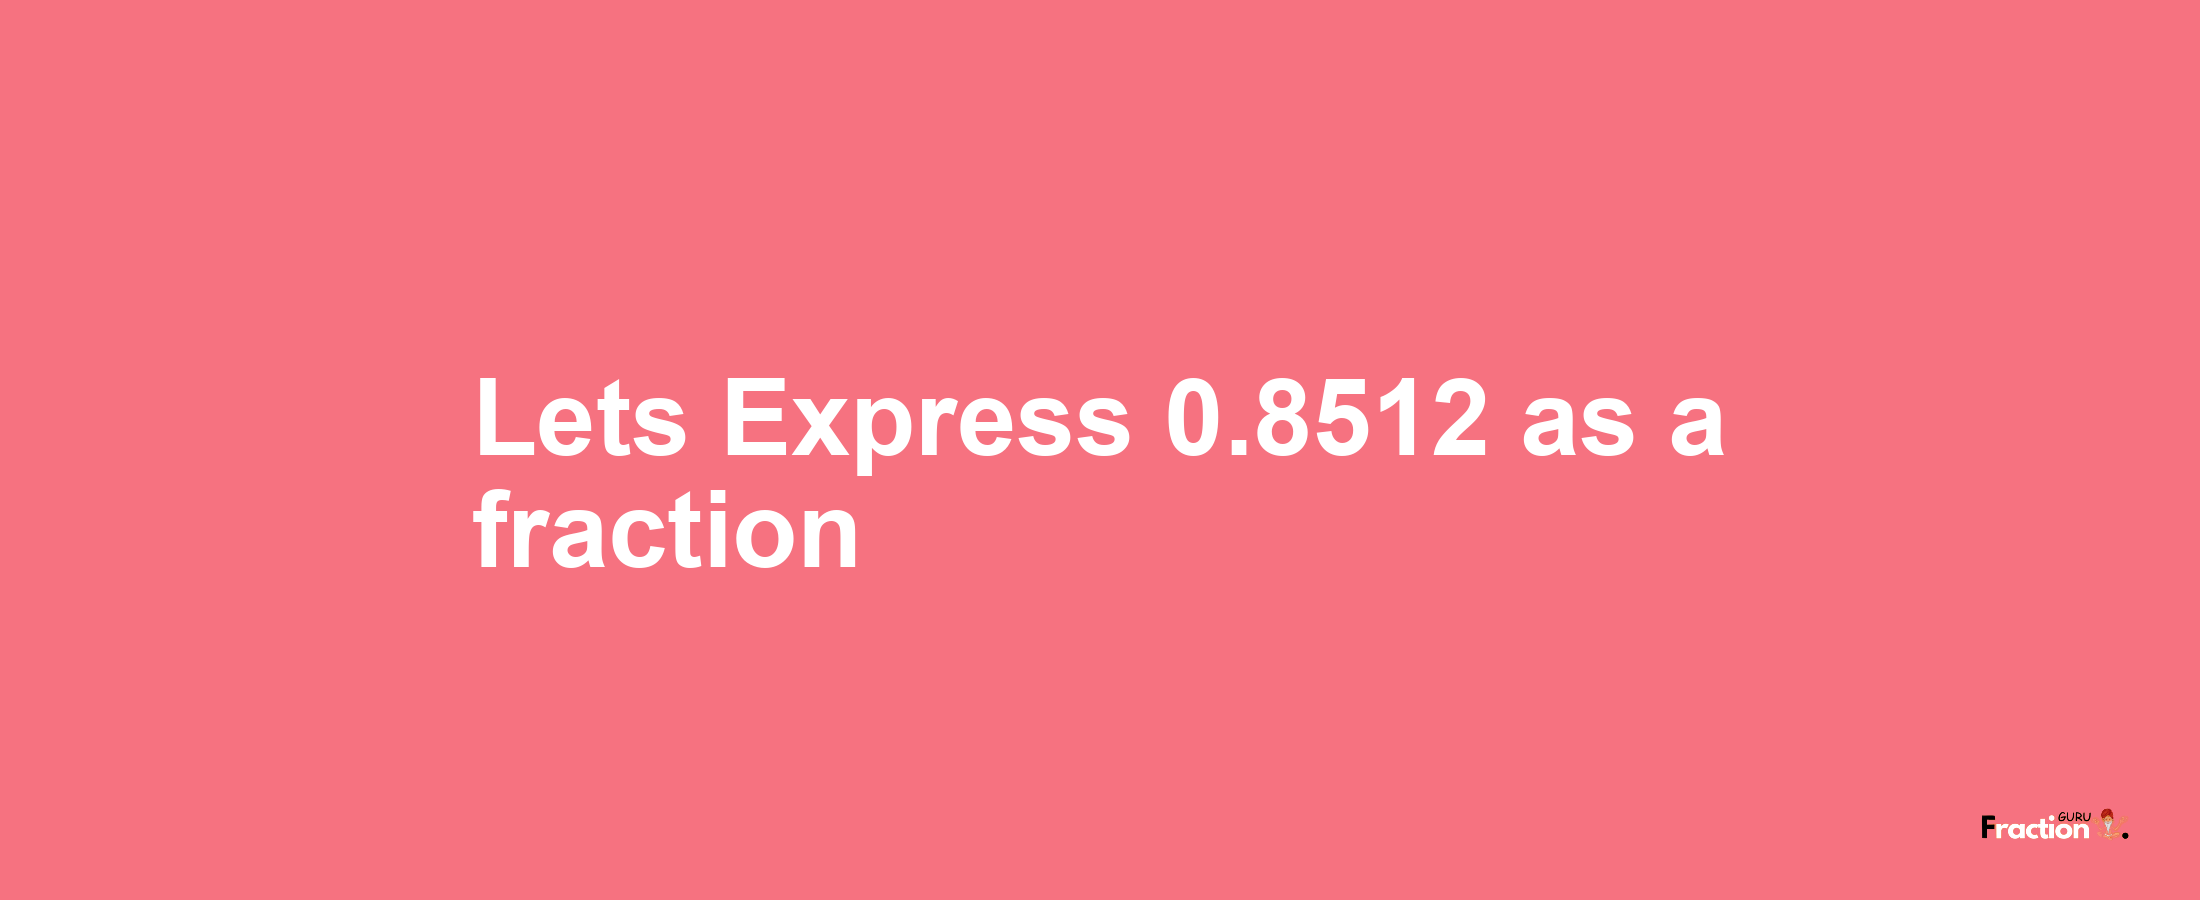 Lets Express 0.8512 as afraction